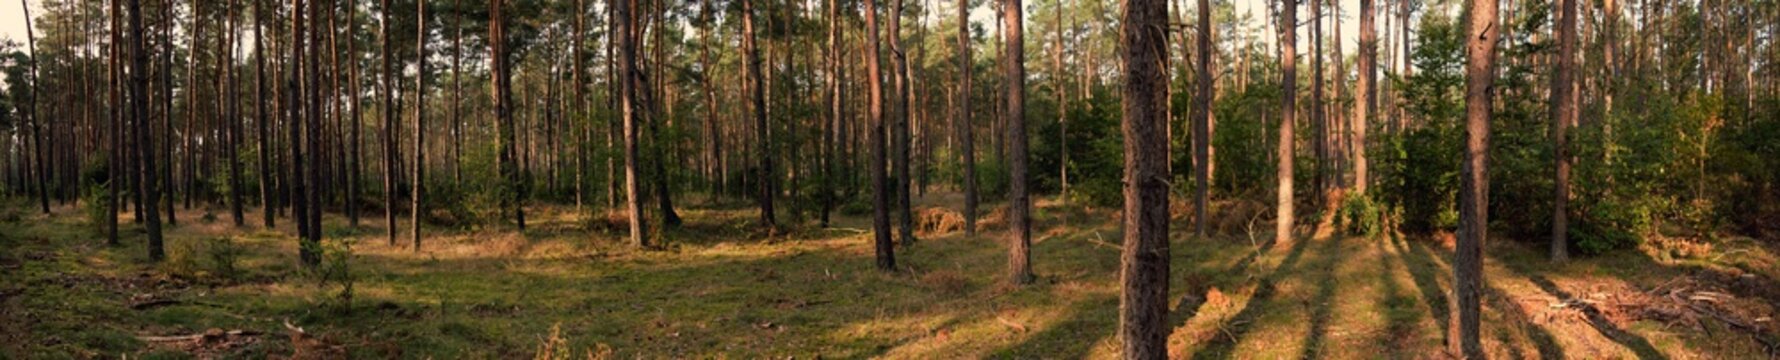 Panorama of trees in a coniferous forest in central Poland.